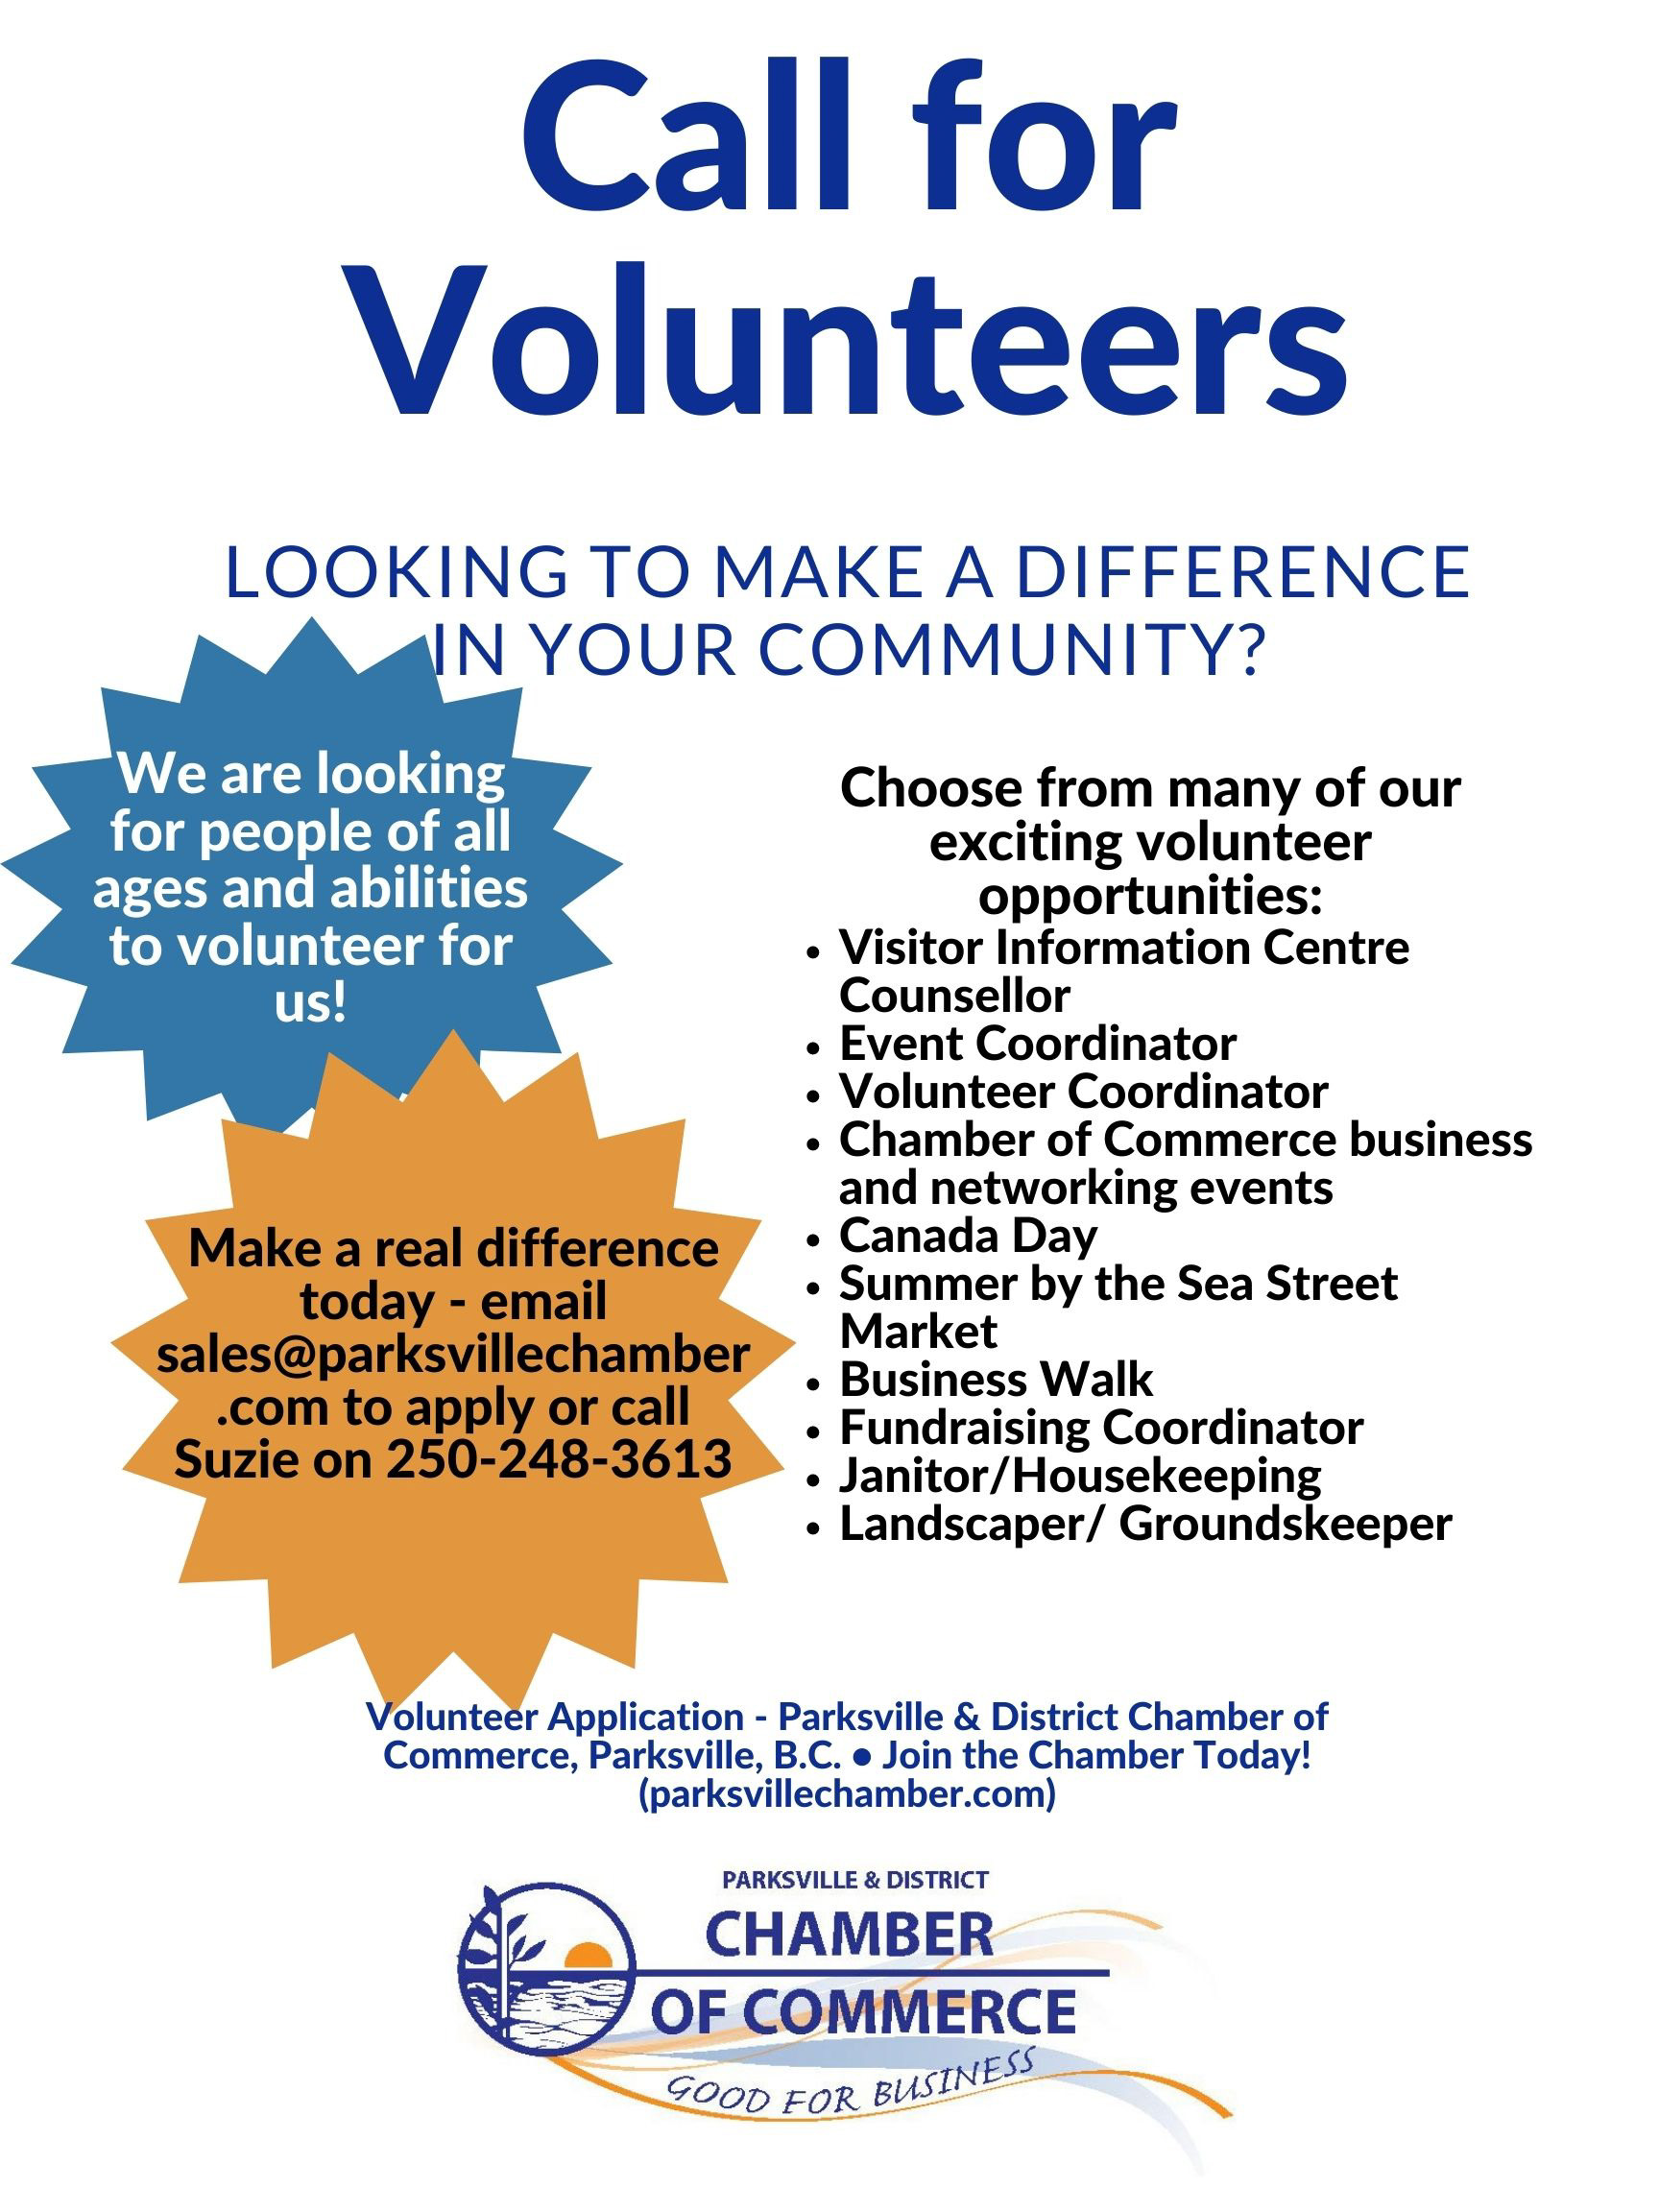 Call for Volunteers edited